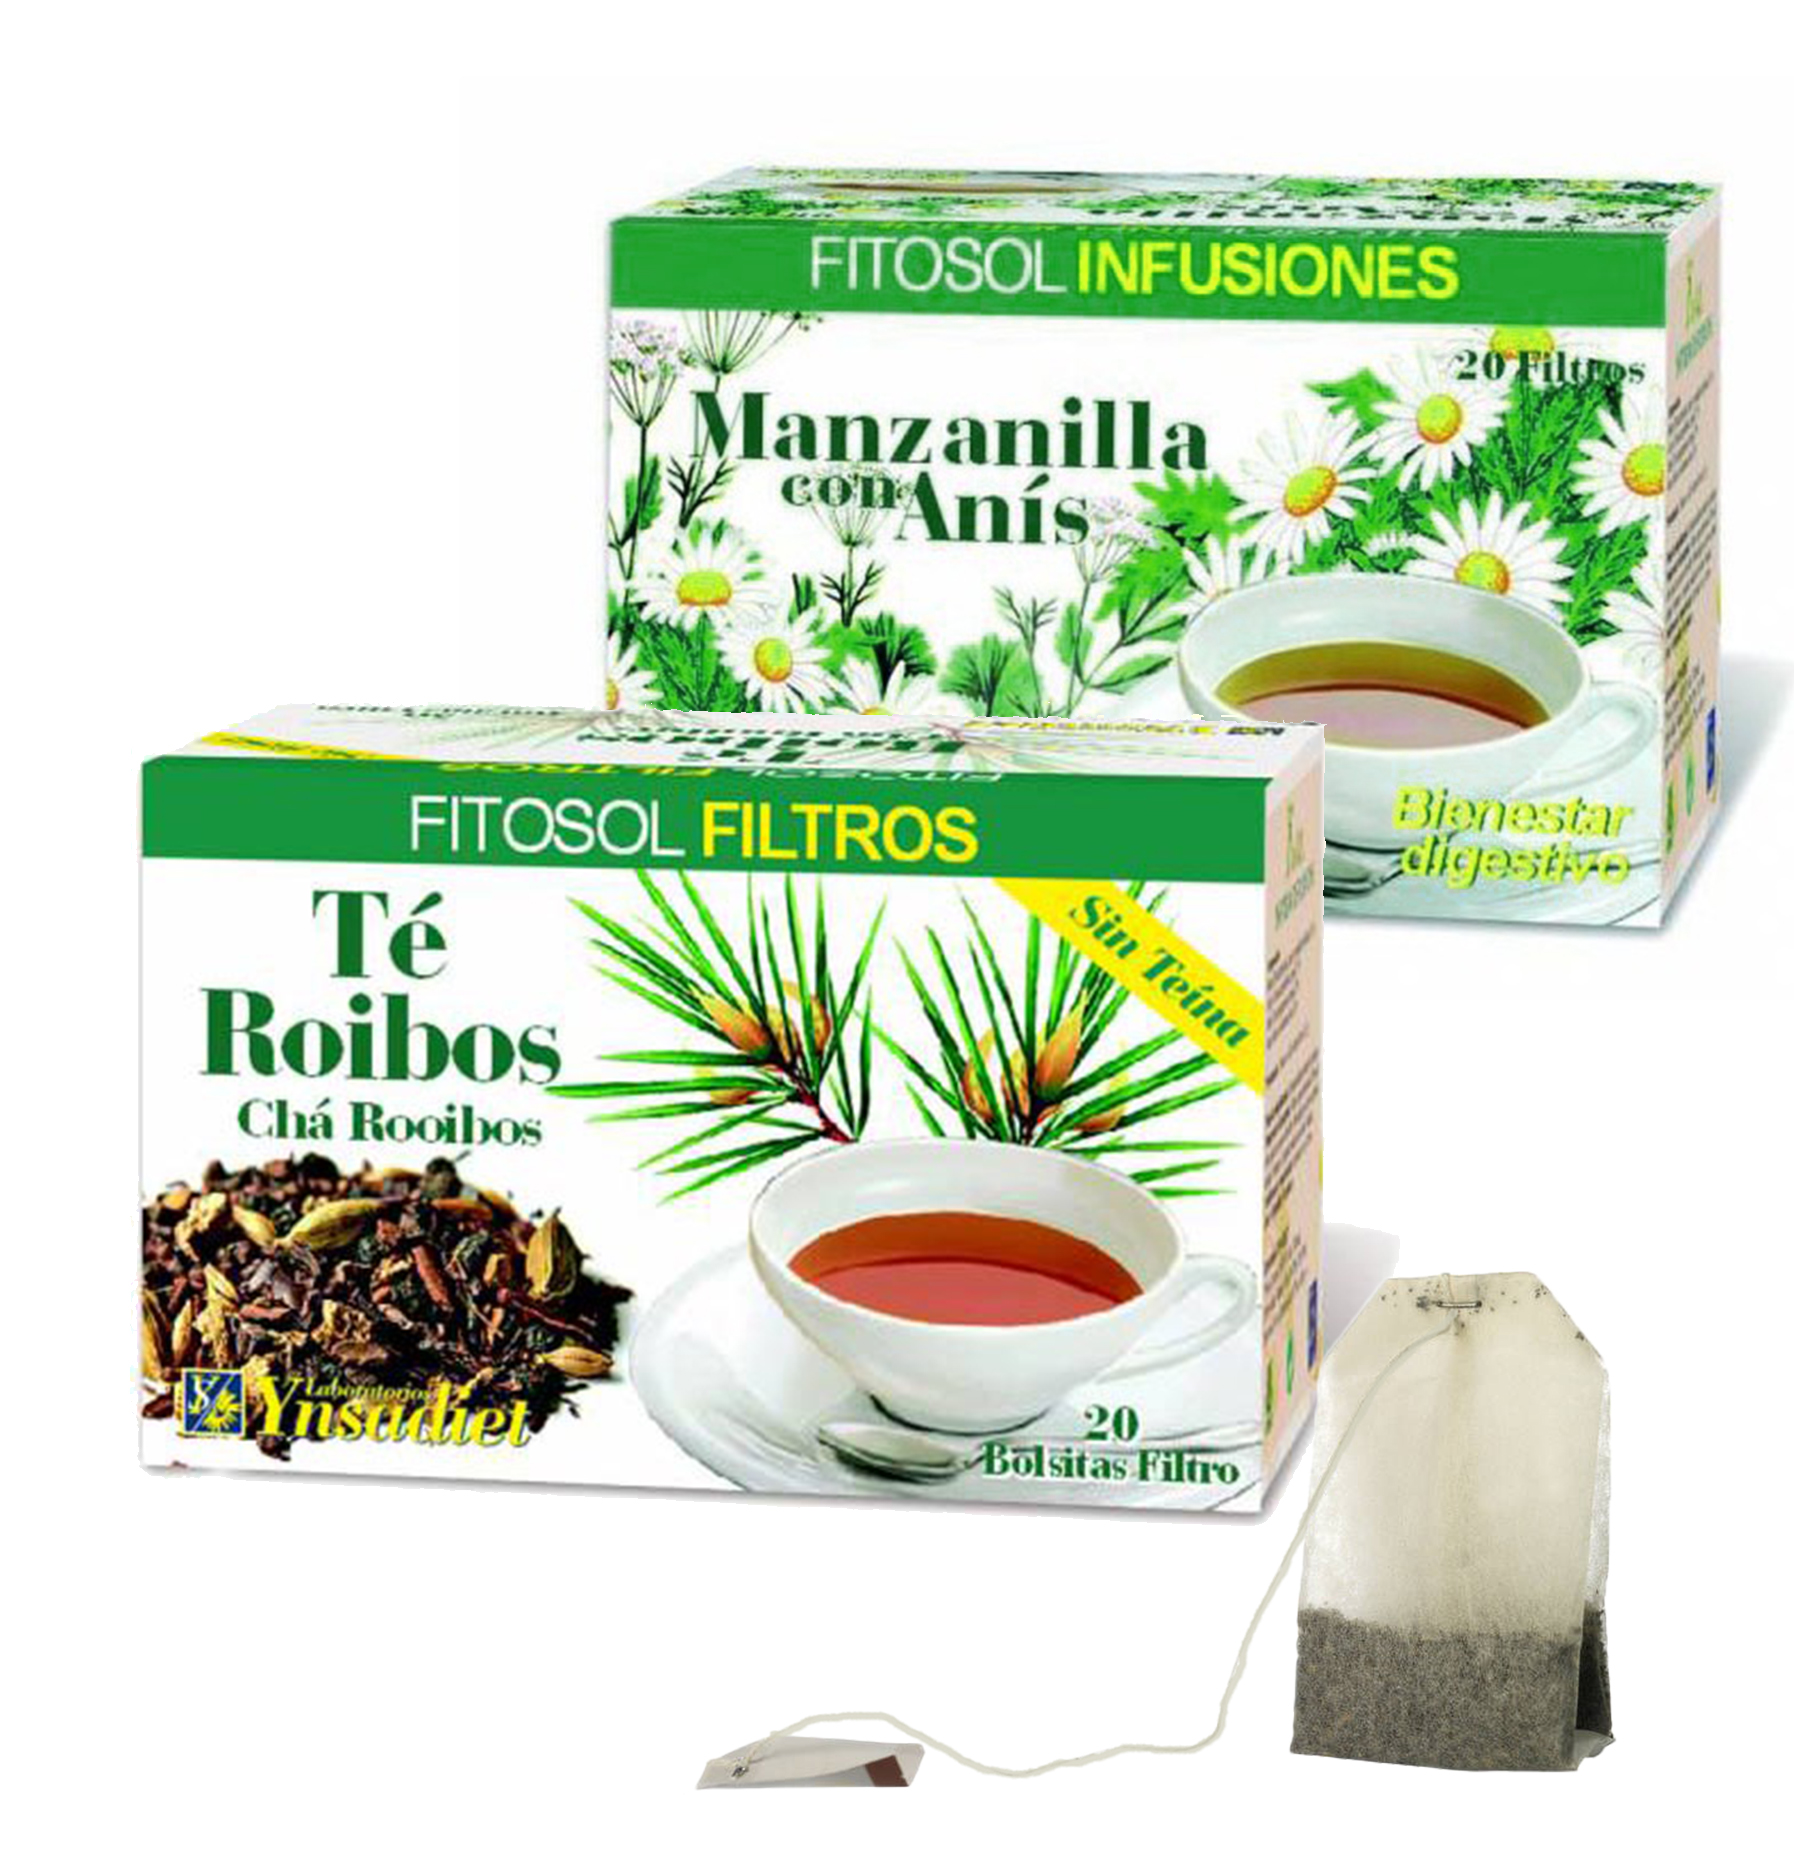 Fitosol Infusiones